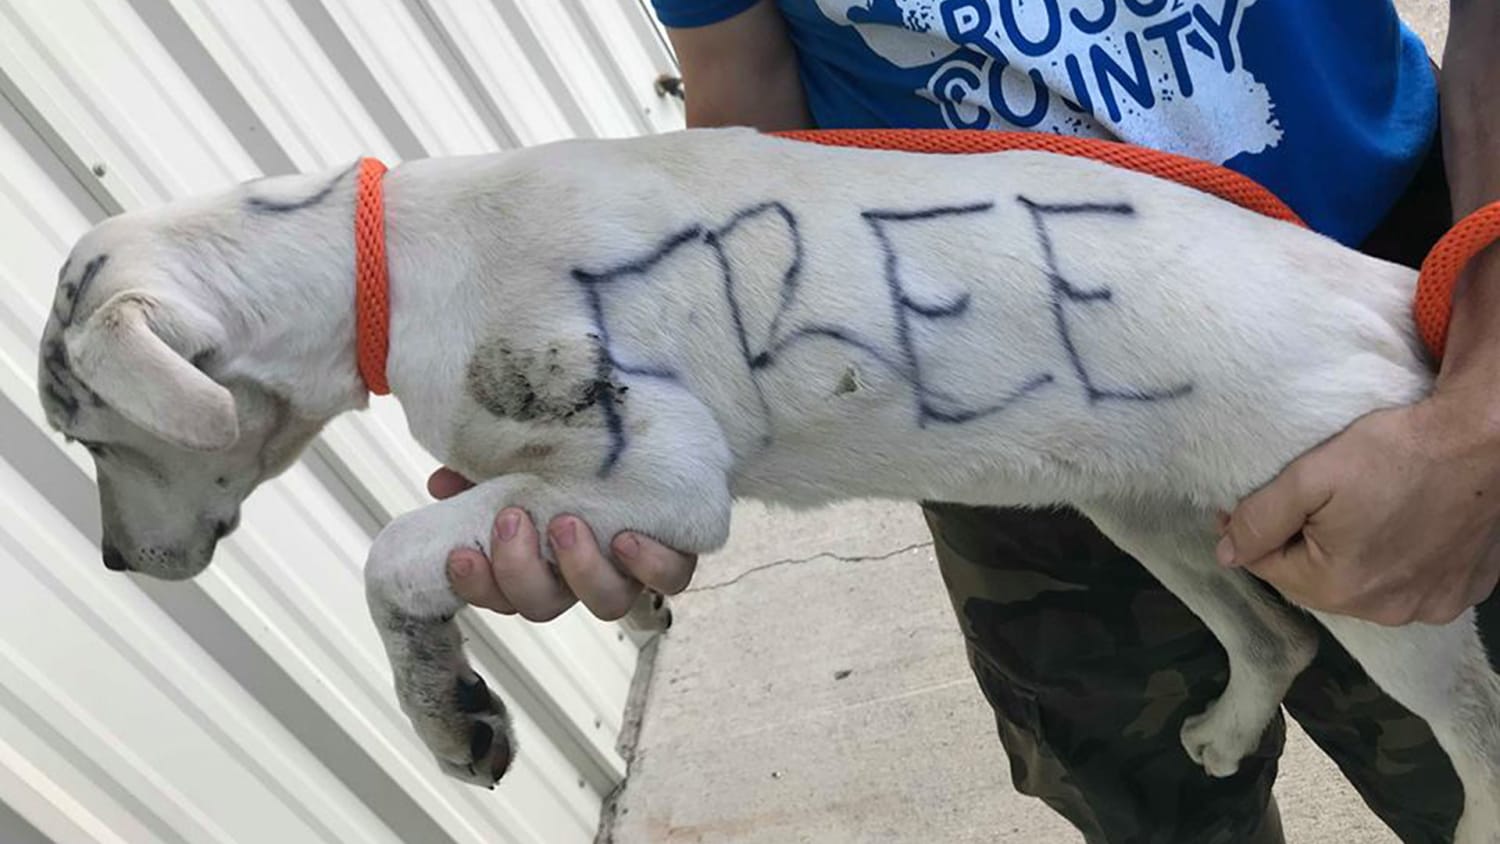 Abandoned dog labeled 'free' in permanent marker finds home